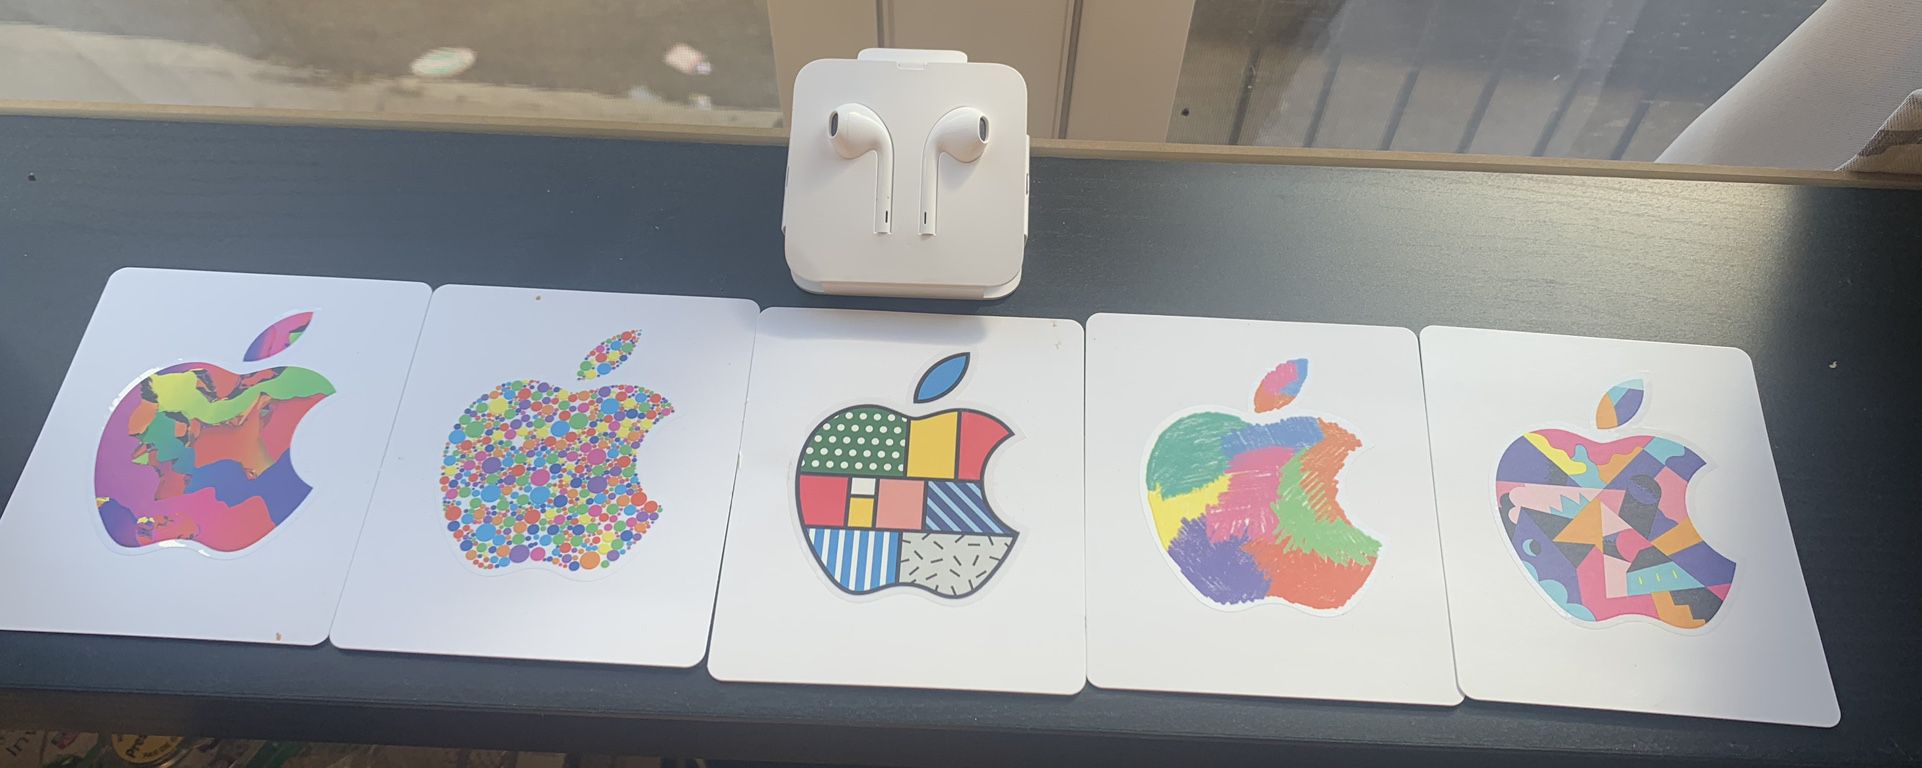 Original Apple Earbuds (wired) + 5 Authentic Stickers